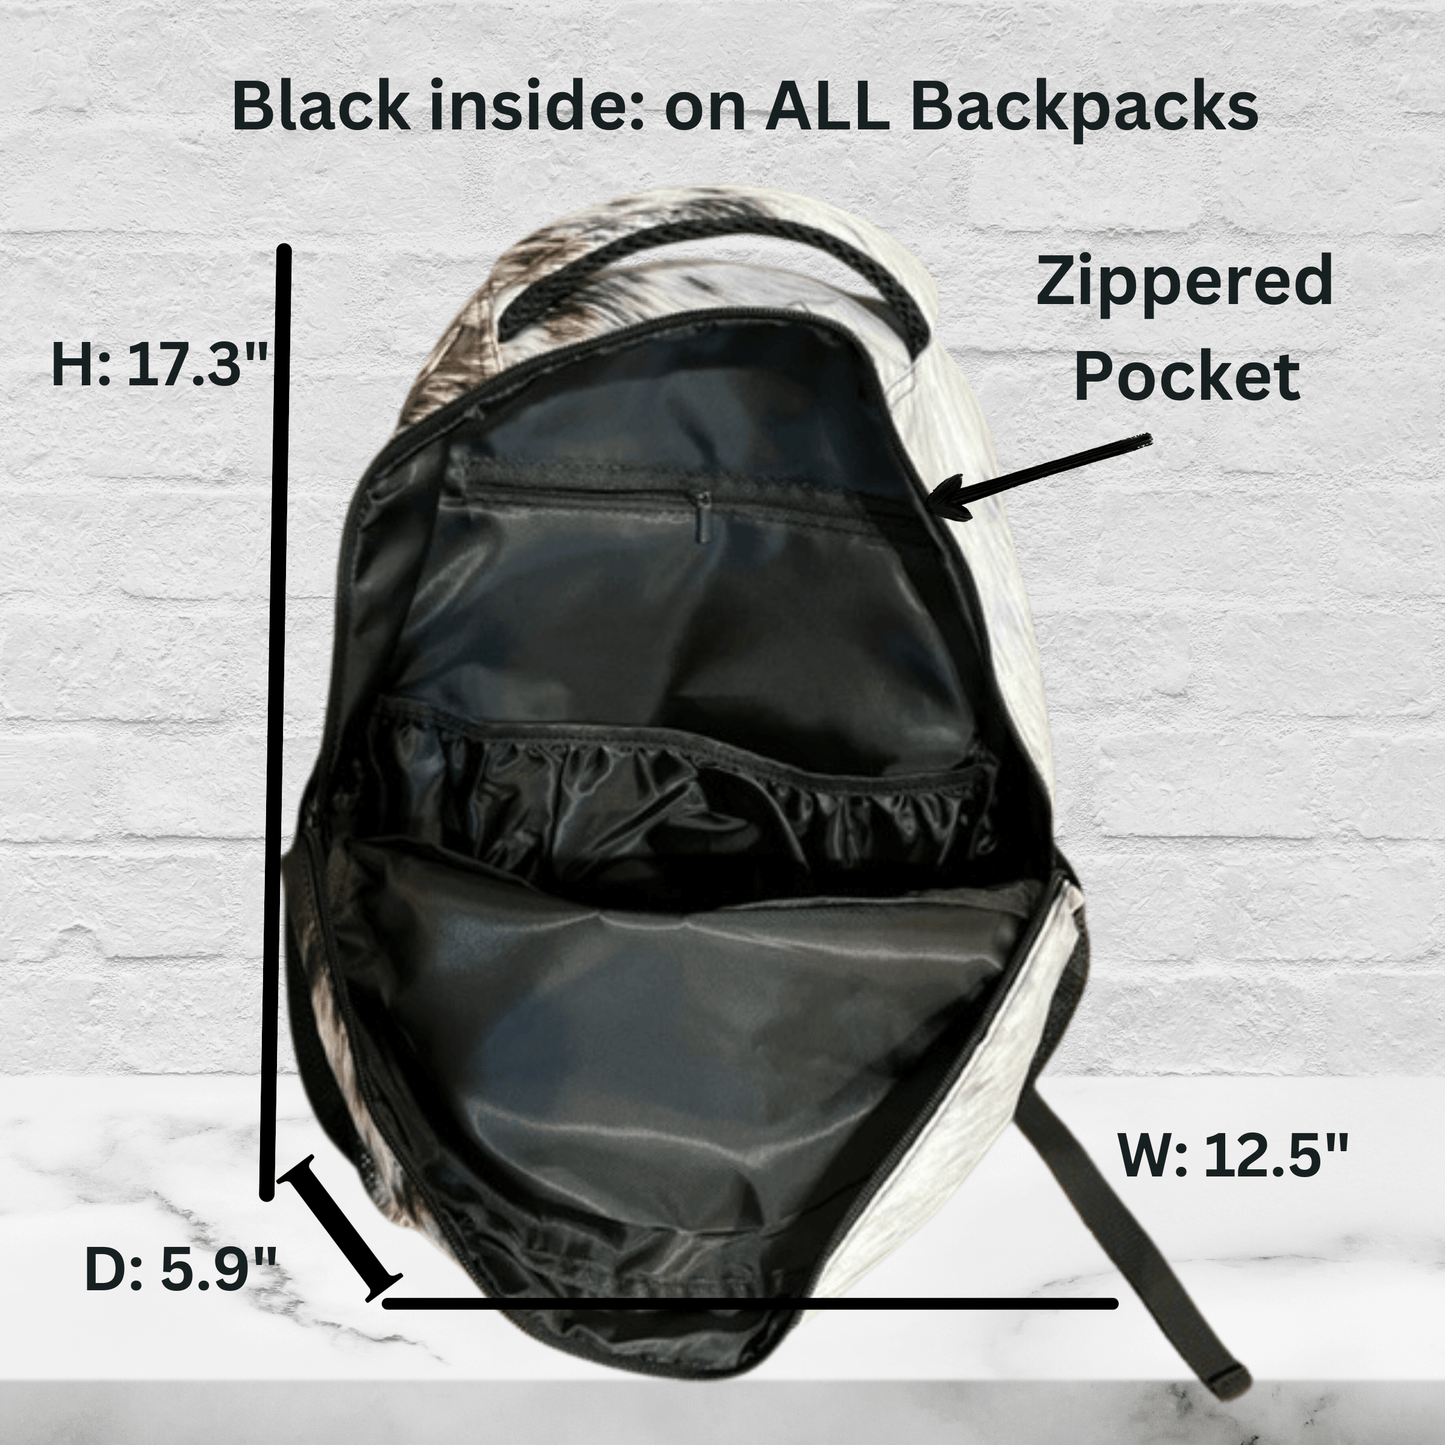 the inside of all our backpack is black and has a zippered pocket and additional storage copartments.